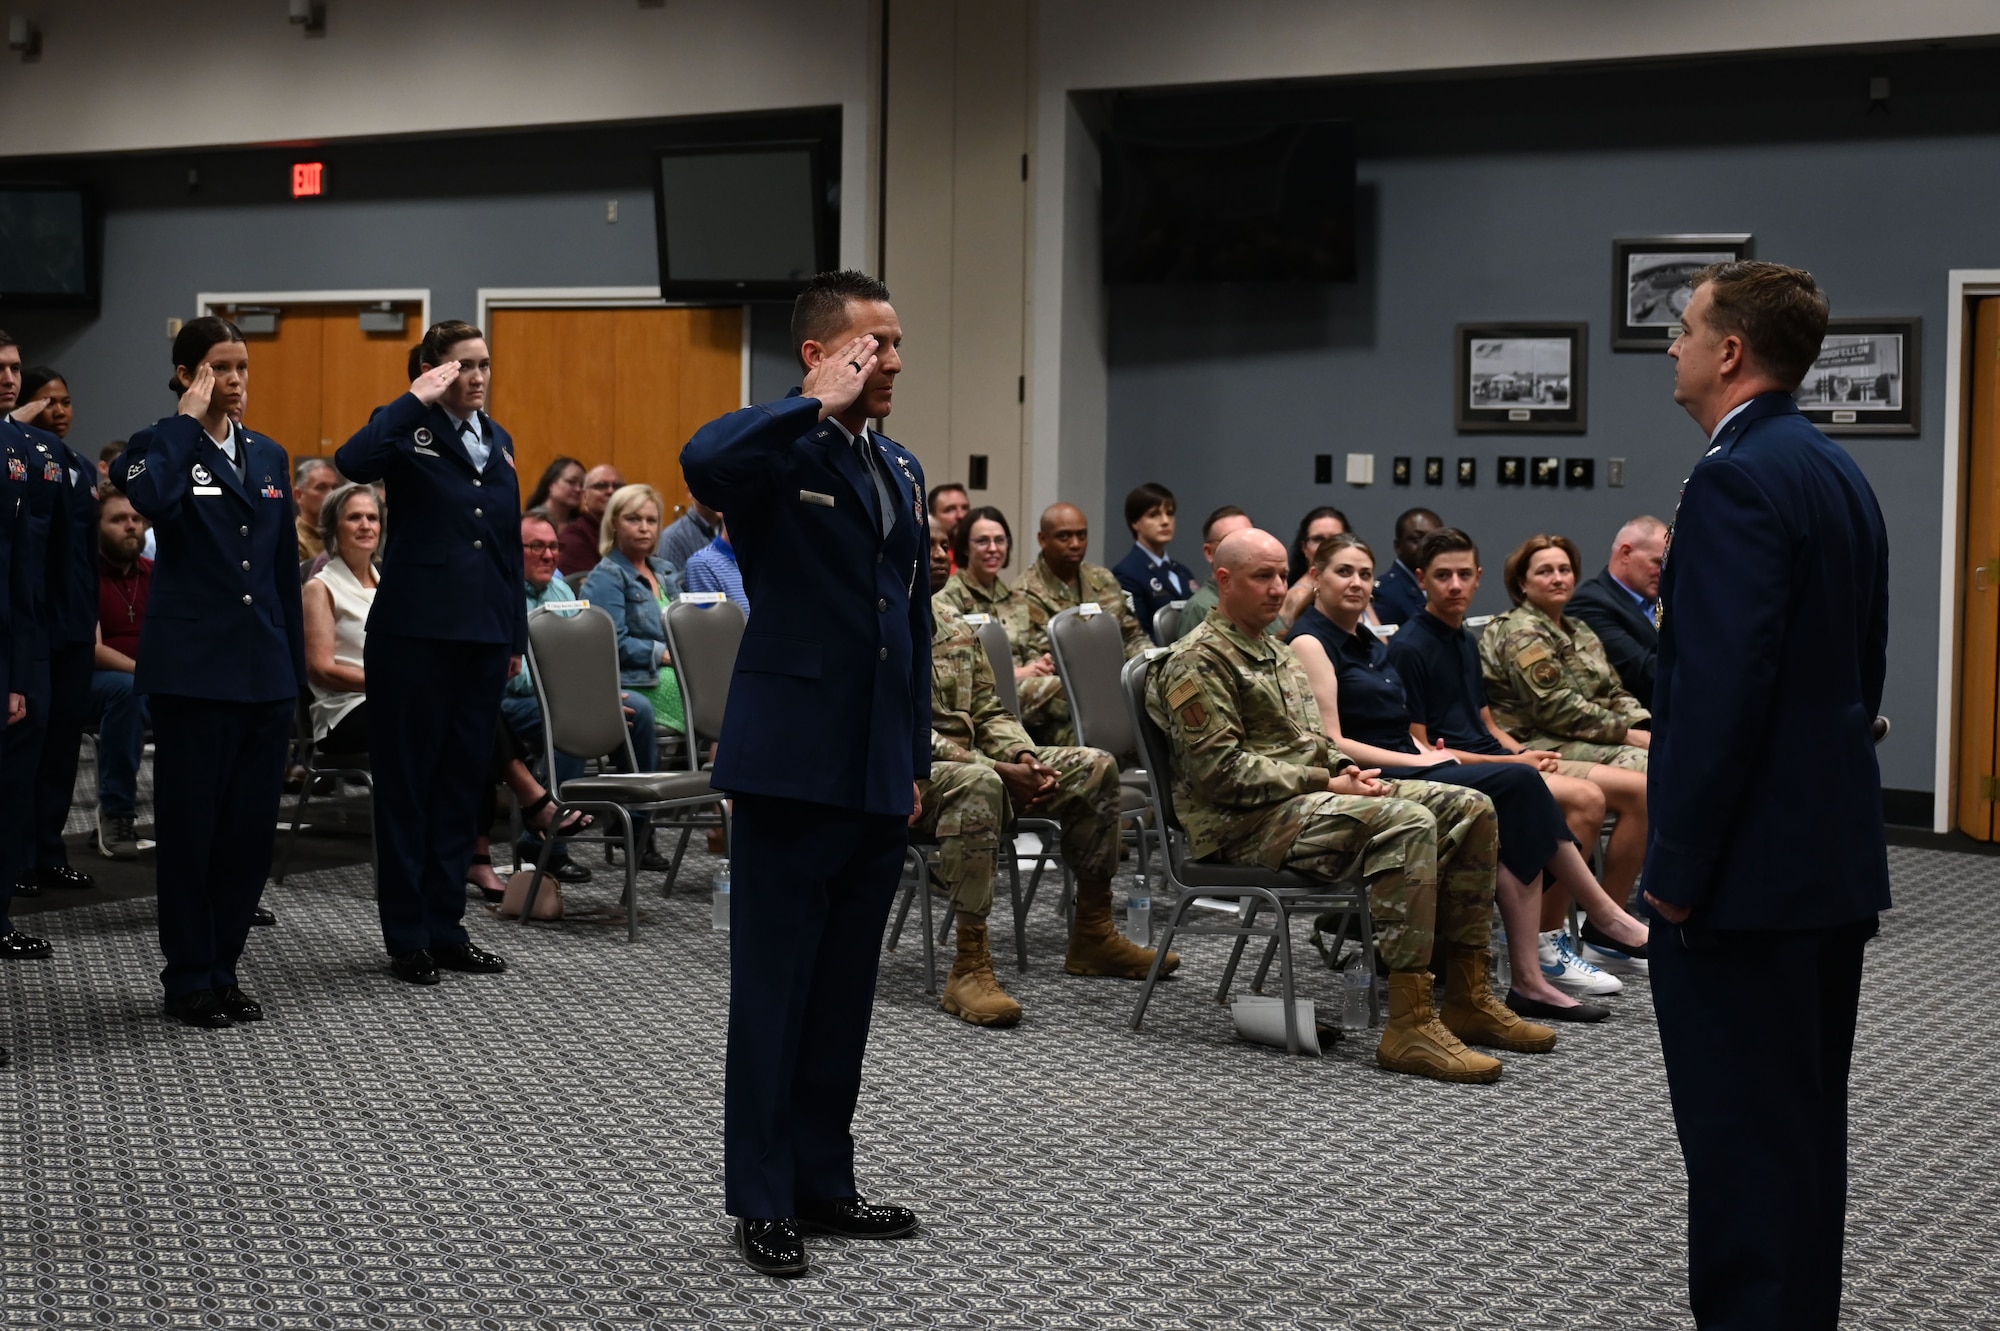 Members of the 313th Training Squadron salute U.S. Air Force Lt. Col. Daniel Blackledge, outgoing 313th Training Squadron commander, during the change of command ceremony at the Powell Event Center, Goodfellow Air Force Base, Texas, June 9, 2023. The squadron’s salute represents a “thank you” to the outgoing commander for their leadership. (U.S. Air Force photo by Airman 1st Class Madison Collier)